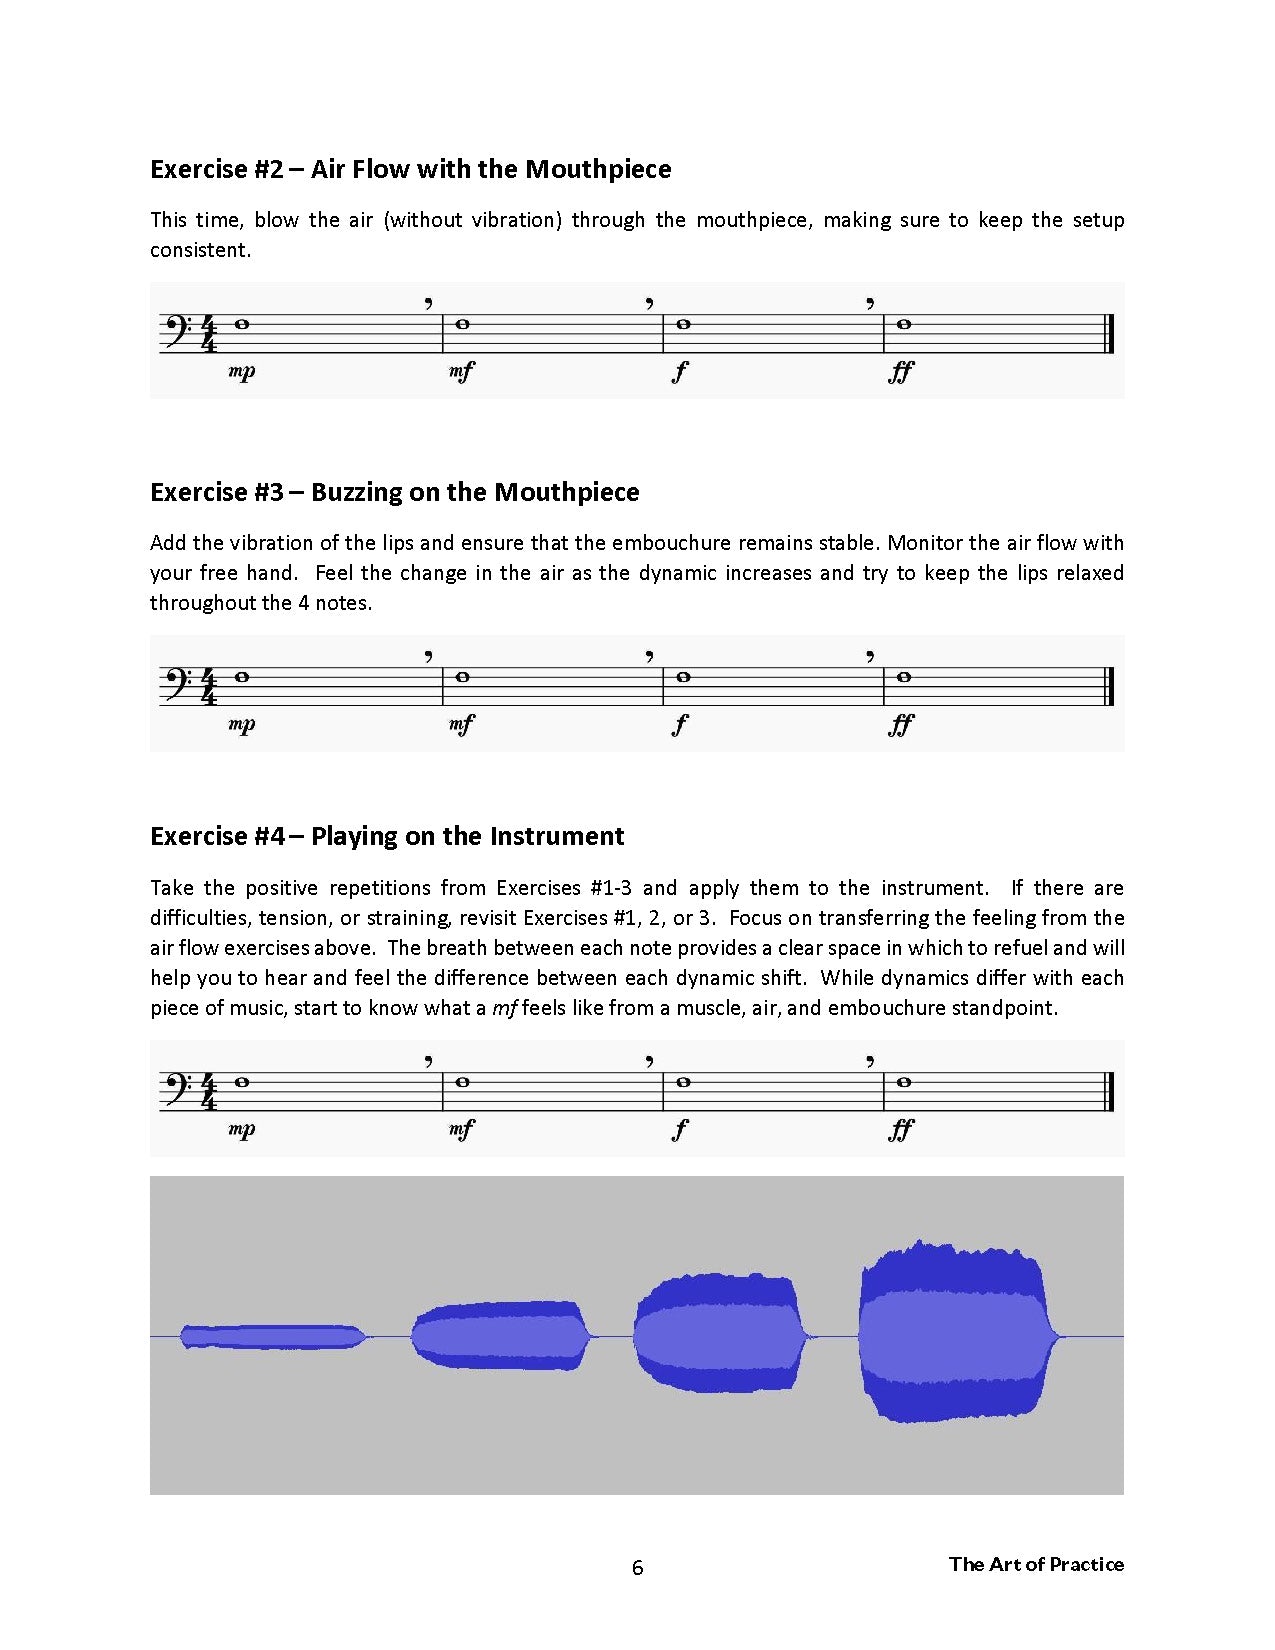 The Art of Practice - BASS Clef - English